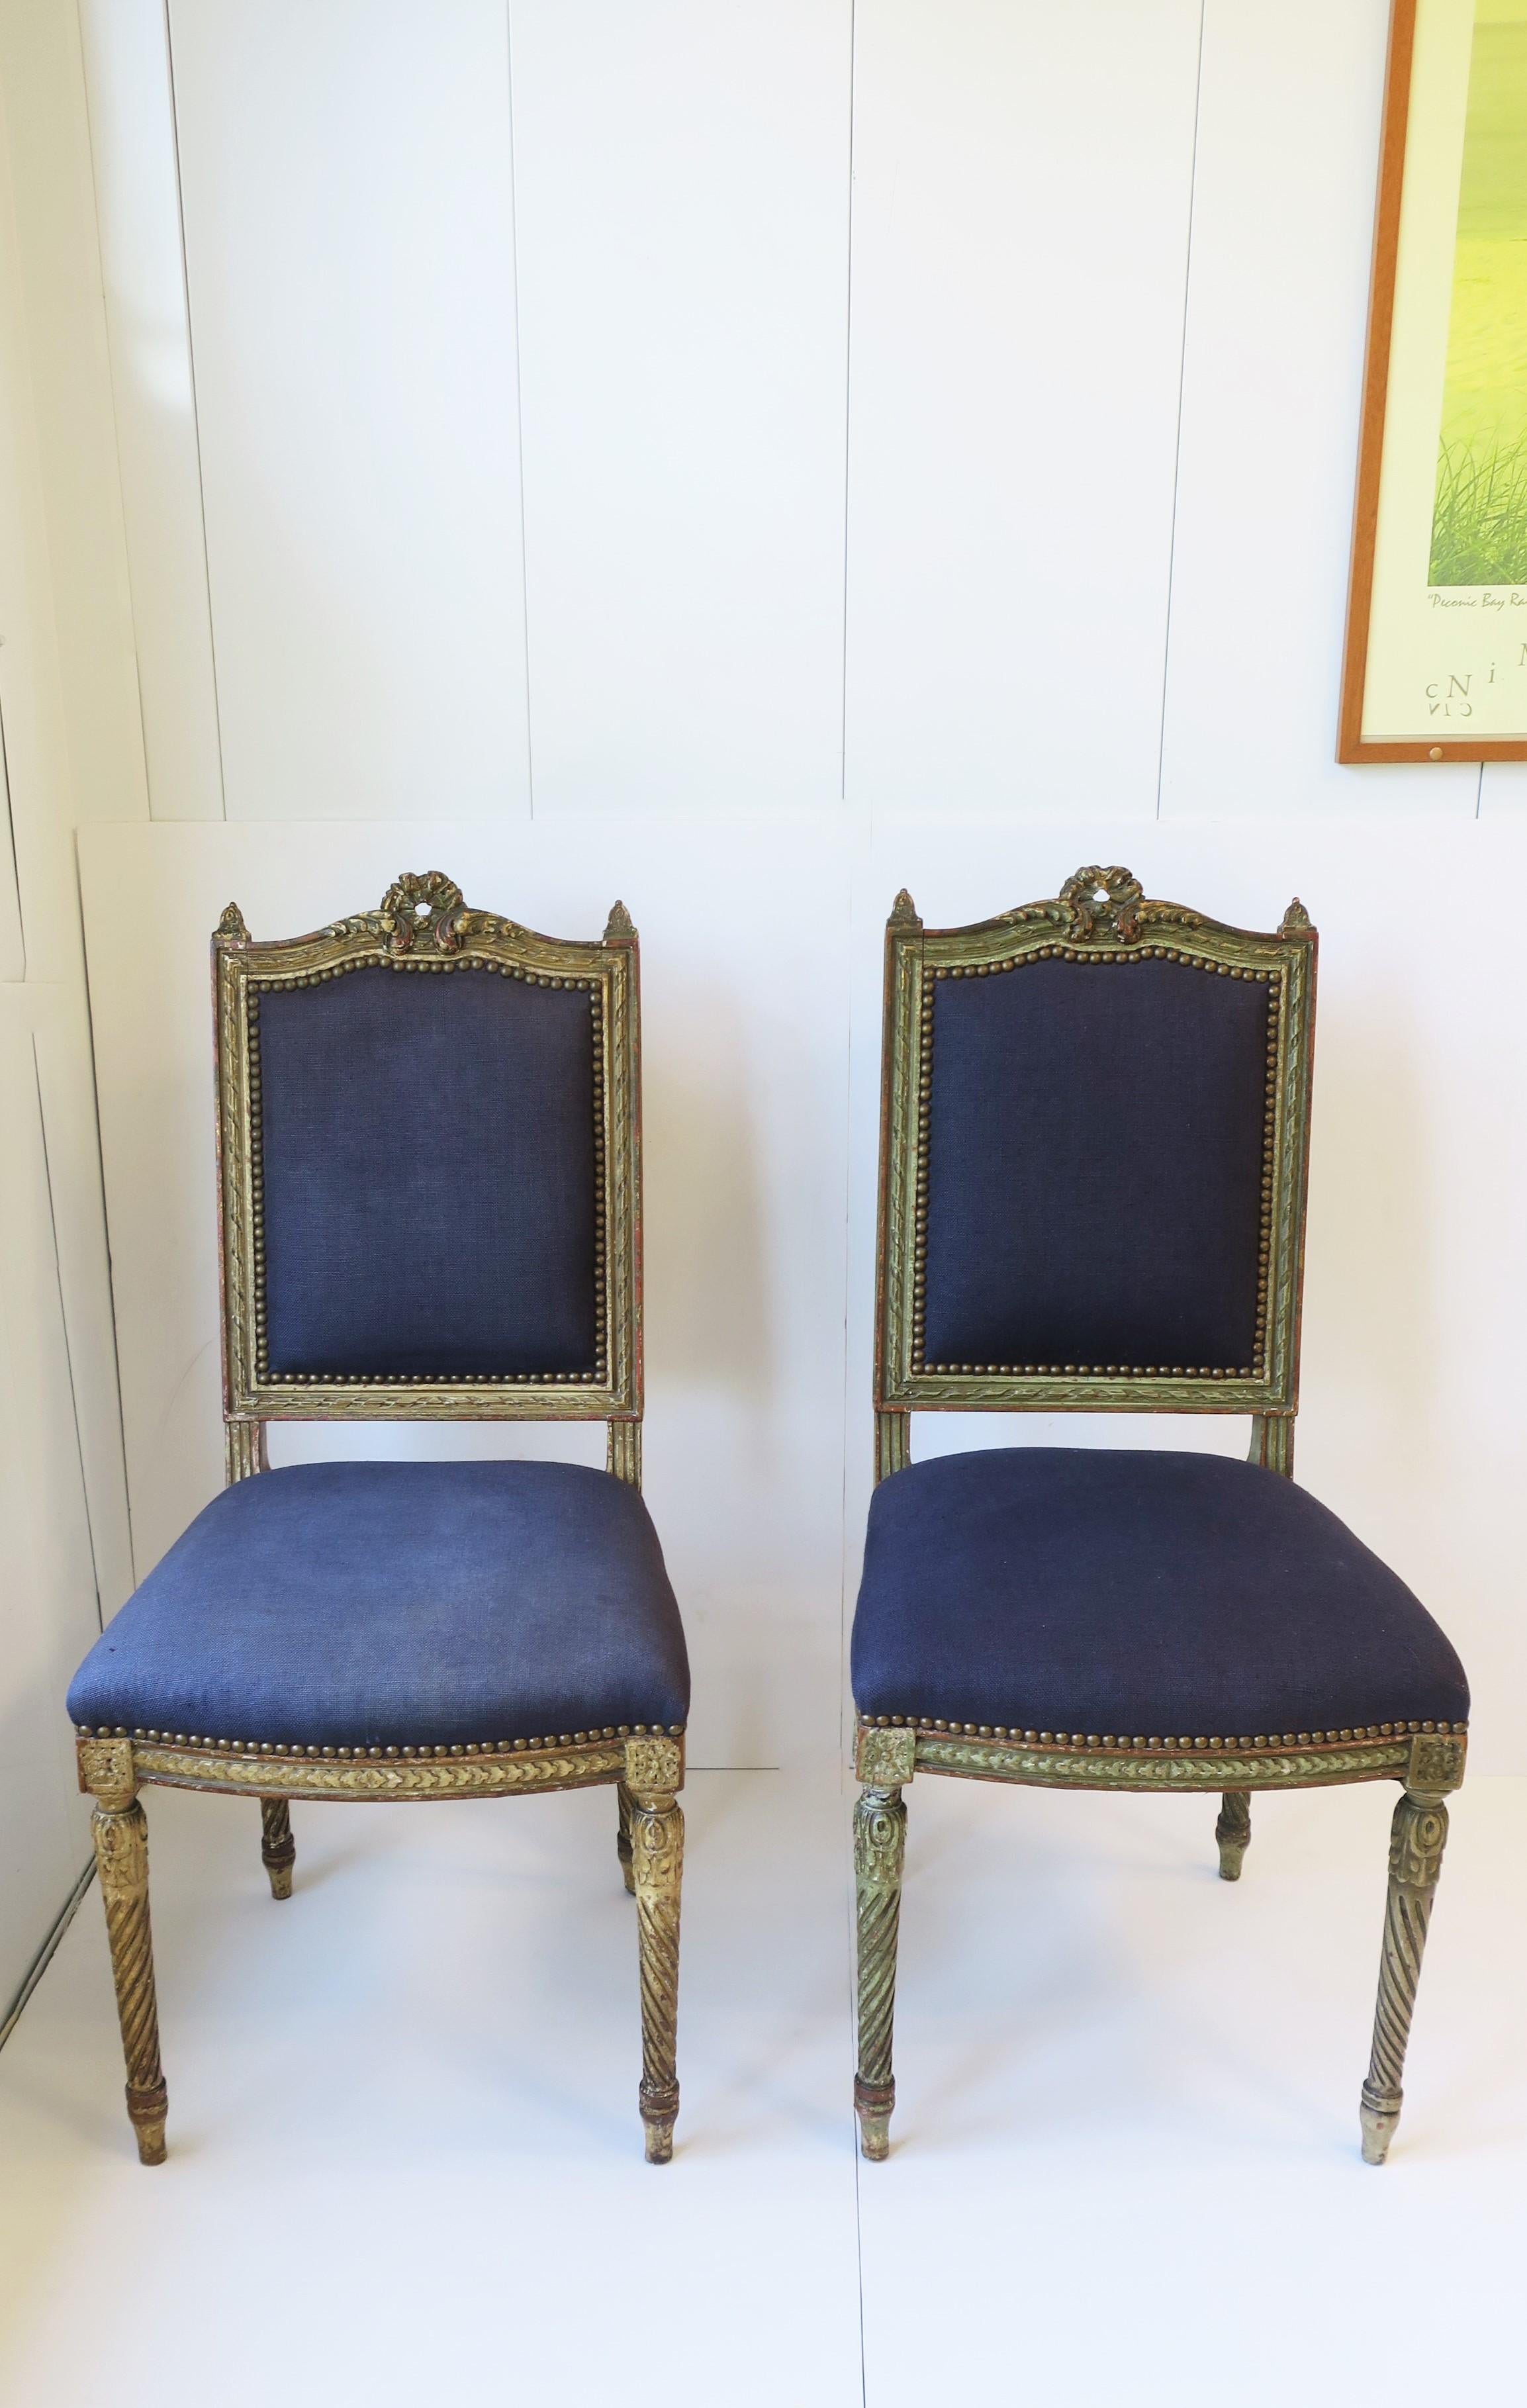 A pair of antique French Louis XVI blue and gold gilt side, desk, hall or dining chairs, circa late-19th Century, France. At some point chairs were reupholstered; shown here with a blue linen fabric finished off with a matte brass nail head design.